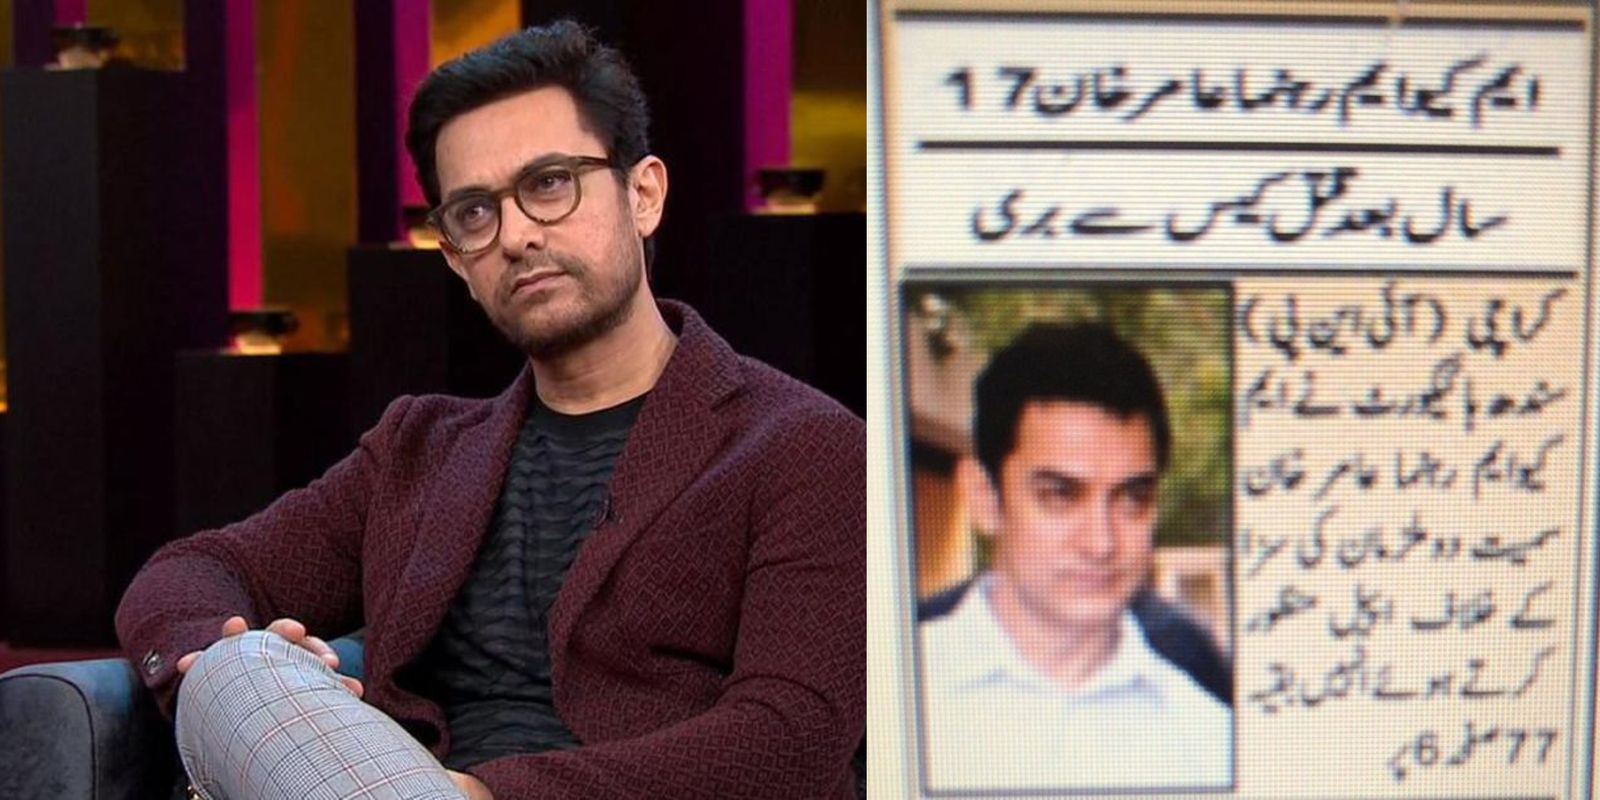  Aamir Khan's Image Pops Up As Murder Accused MQM Leader During A Pakistani News Bulletin In A Major Goof Up